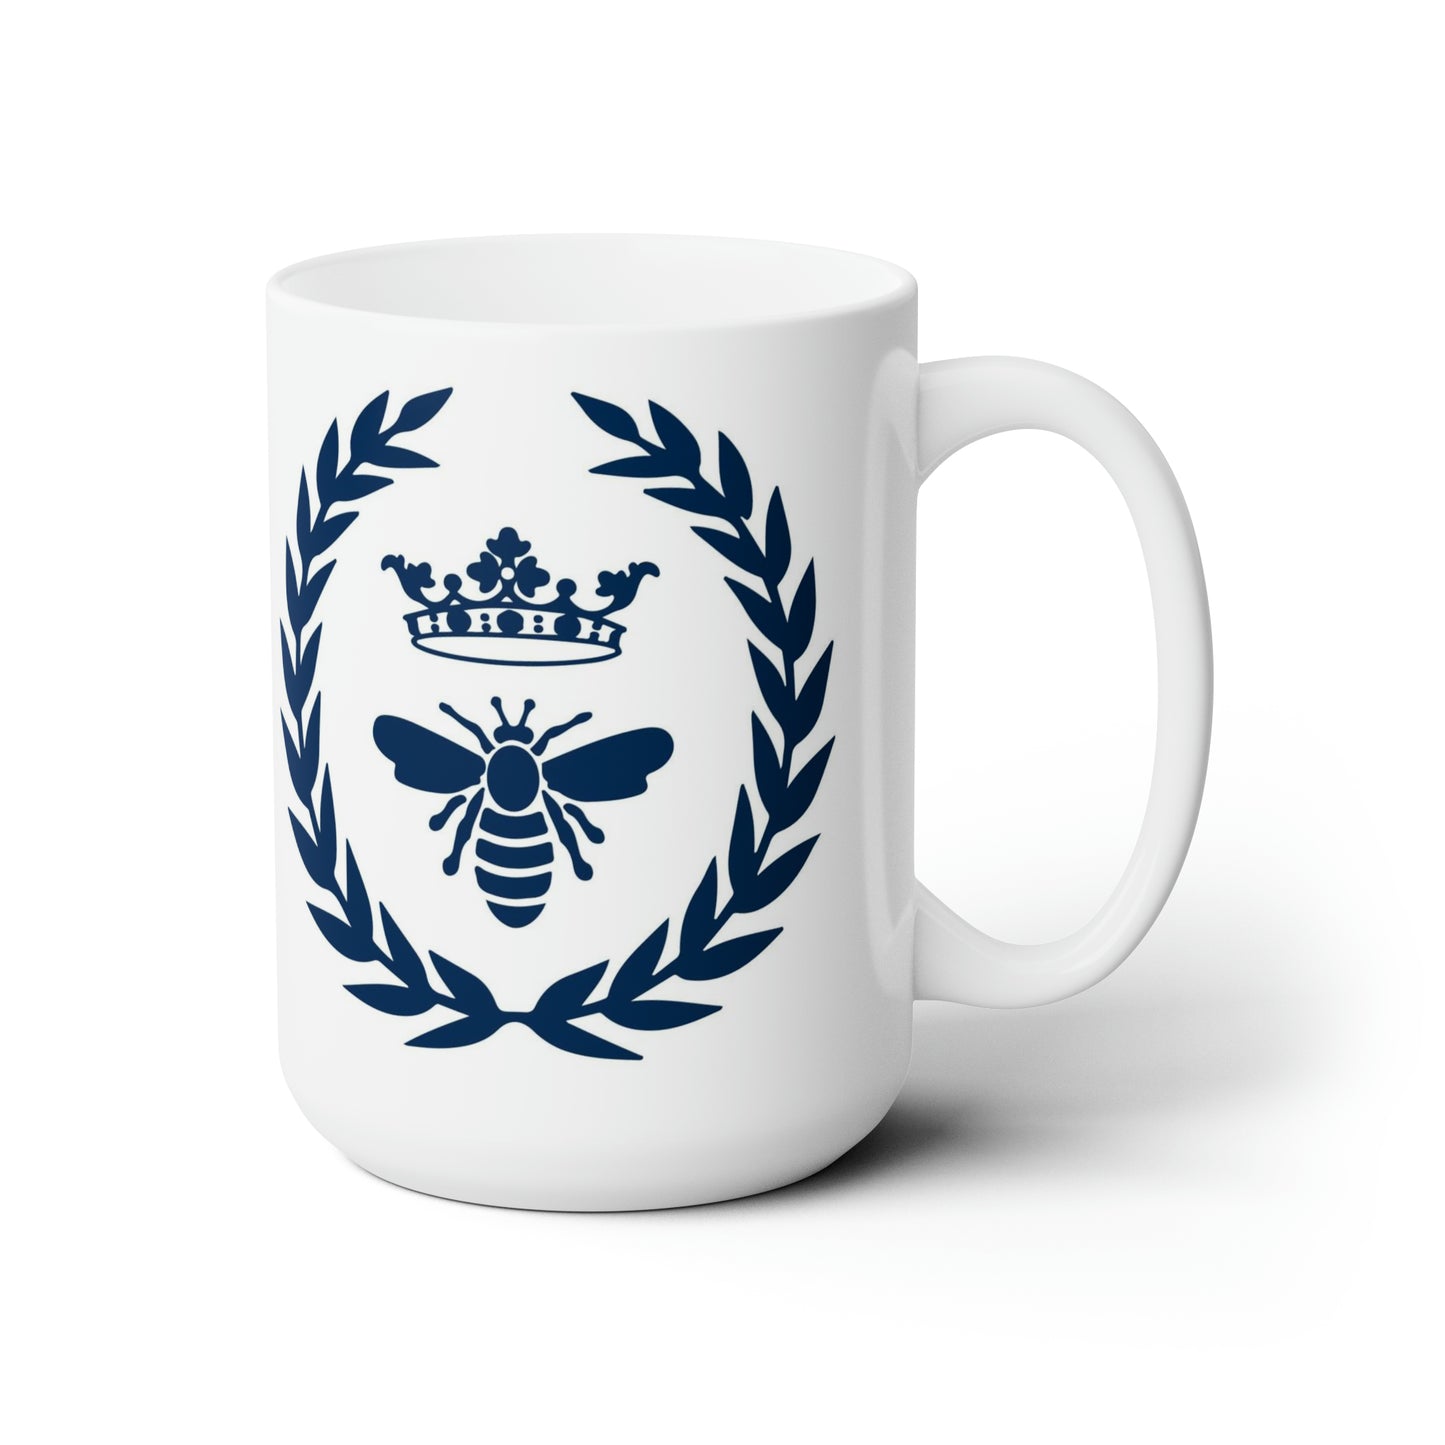 Queen Bee Ceramic Mug - Available In 4 Colors